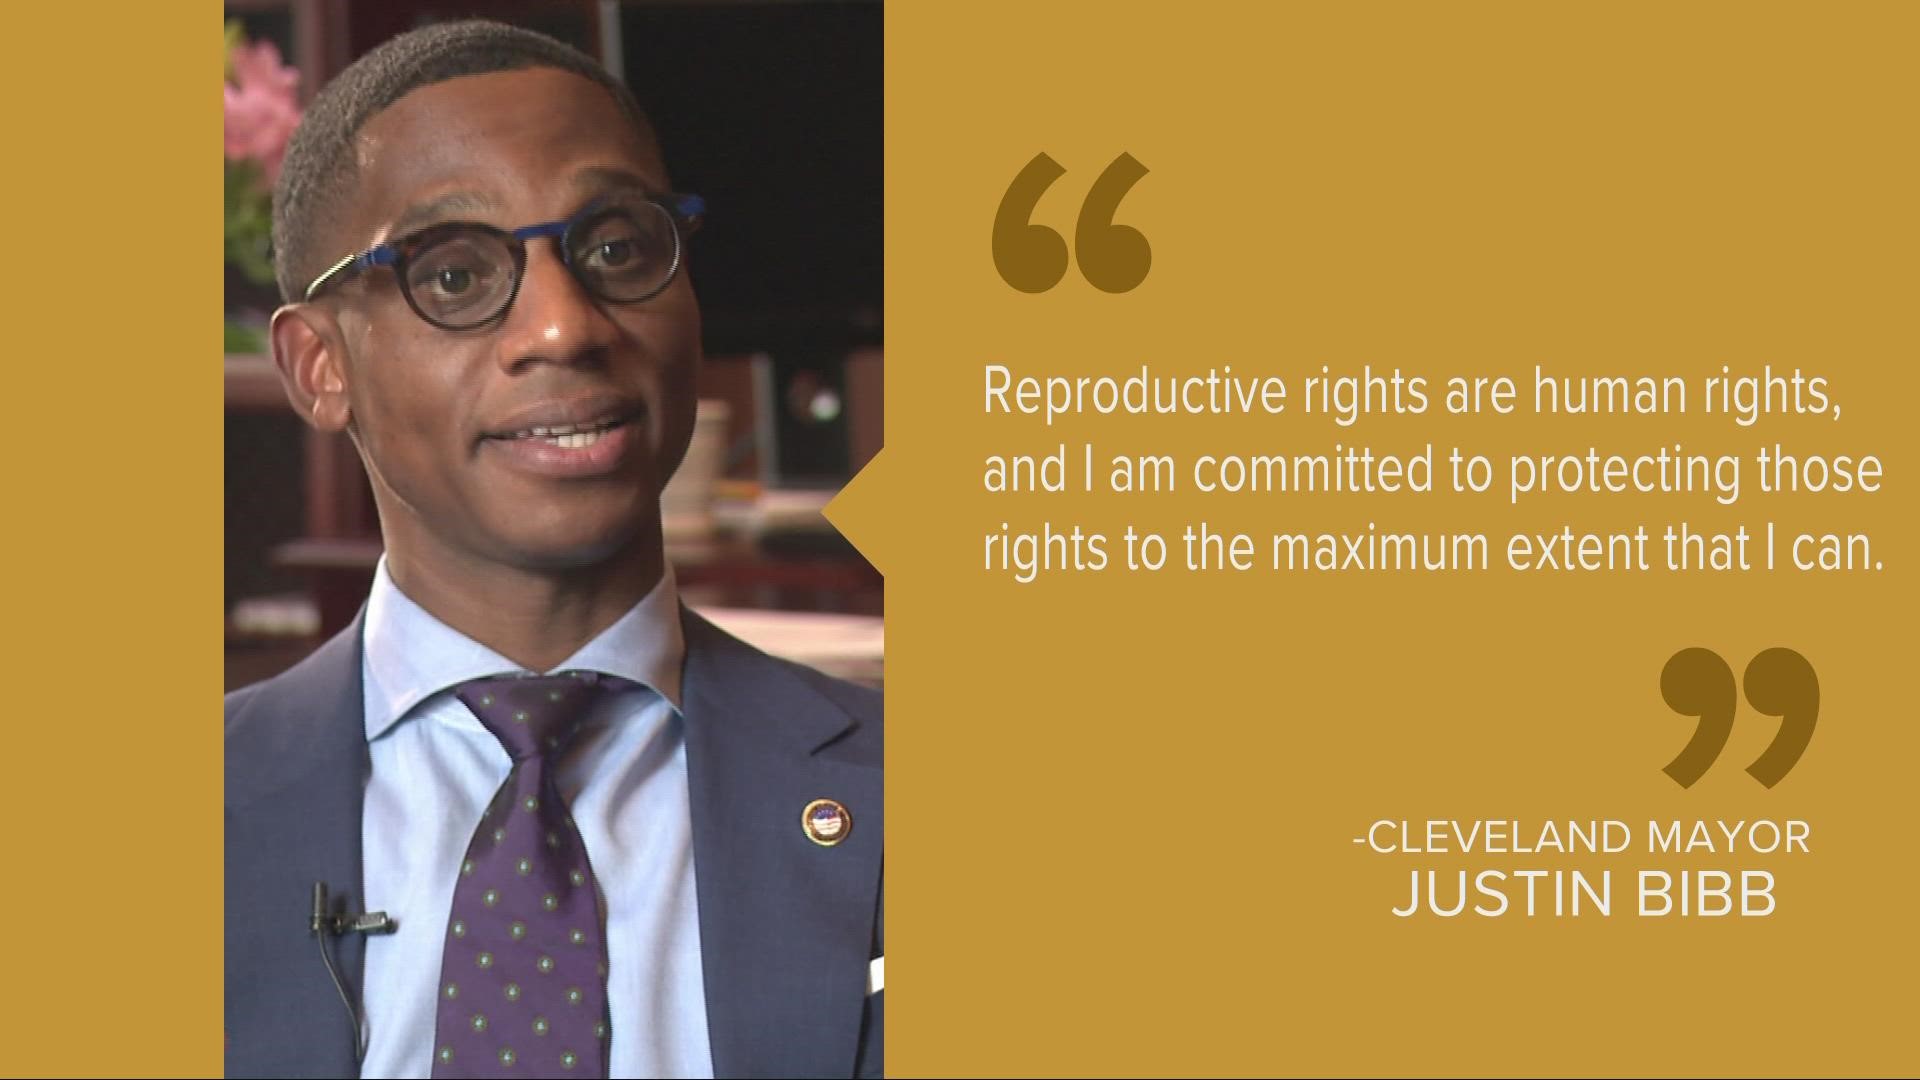 Cleveland Mayor Justin Bibb has announced new policies following the overturning of Roe v. Wade.